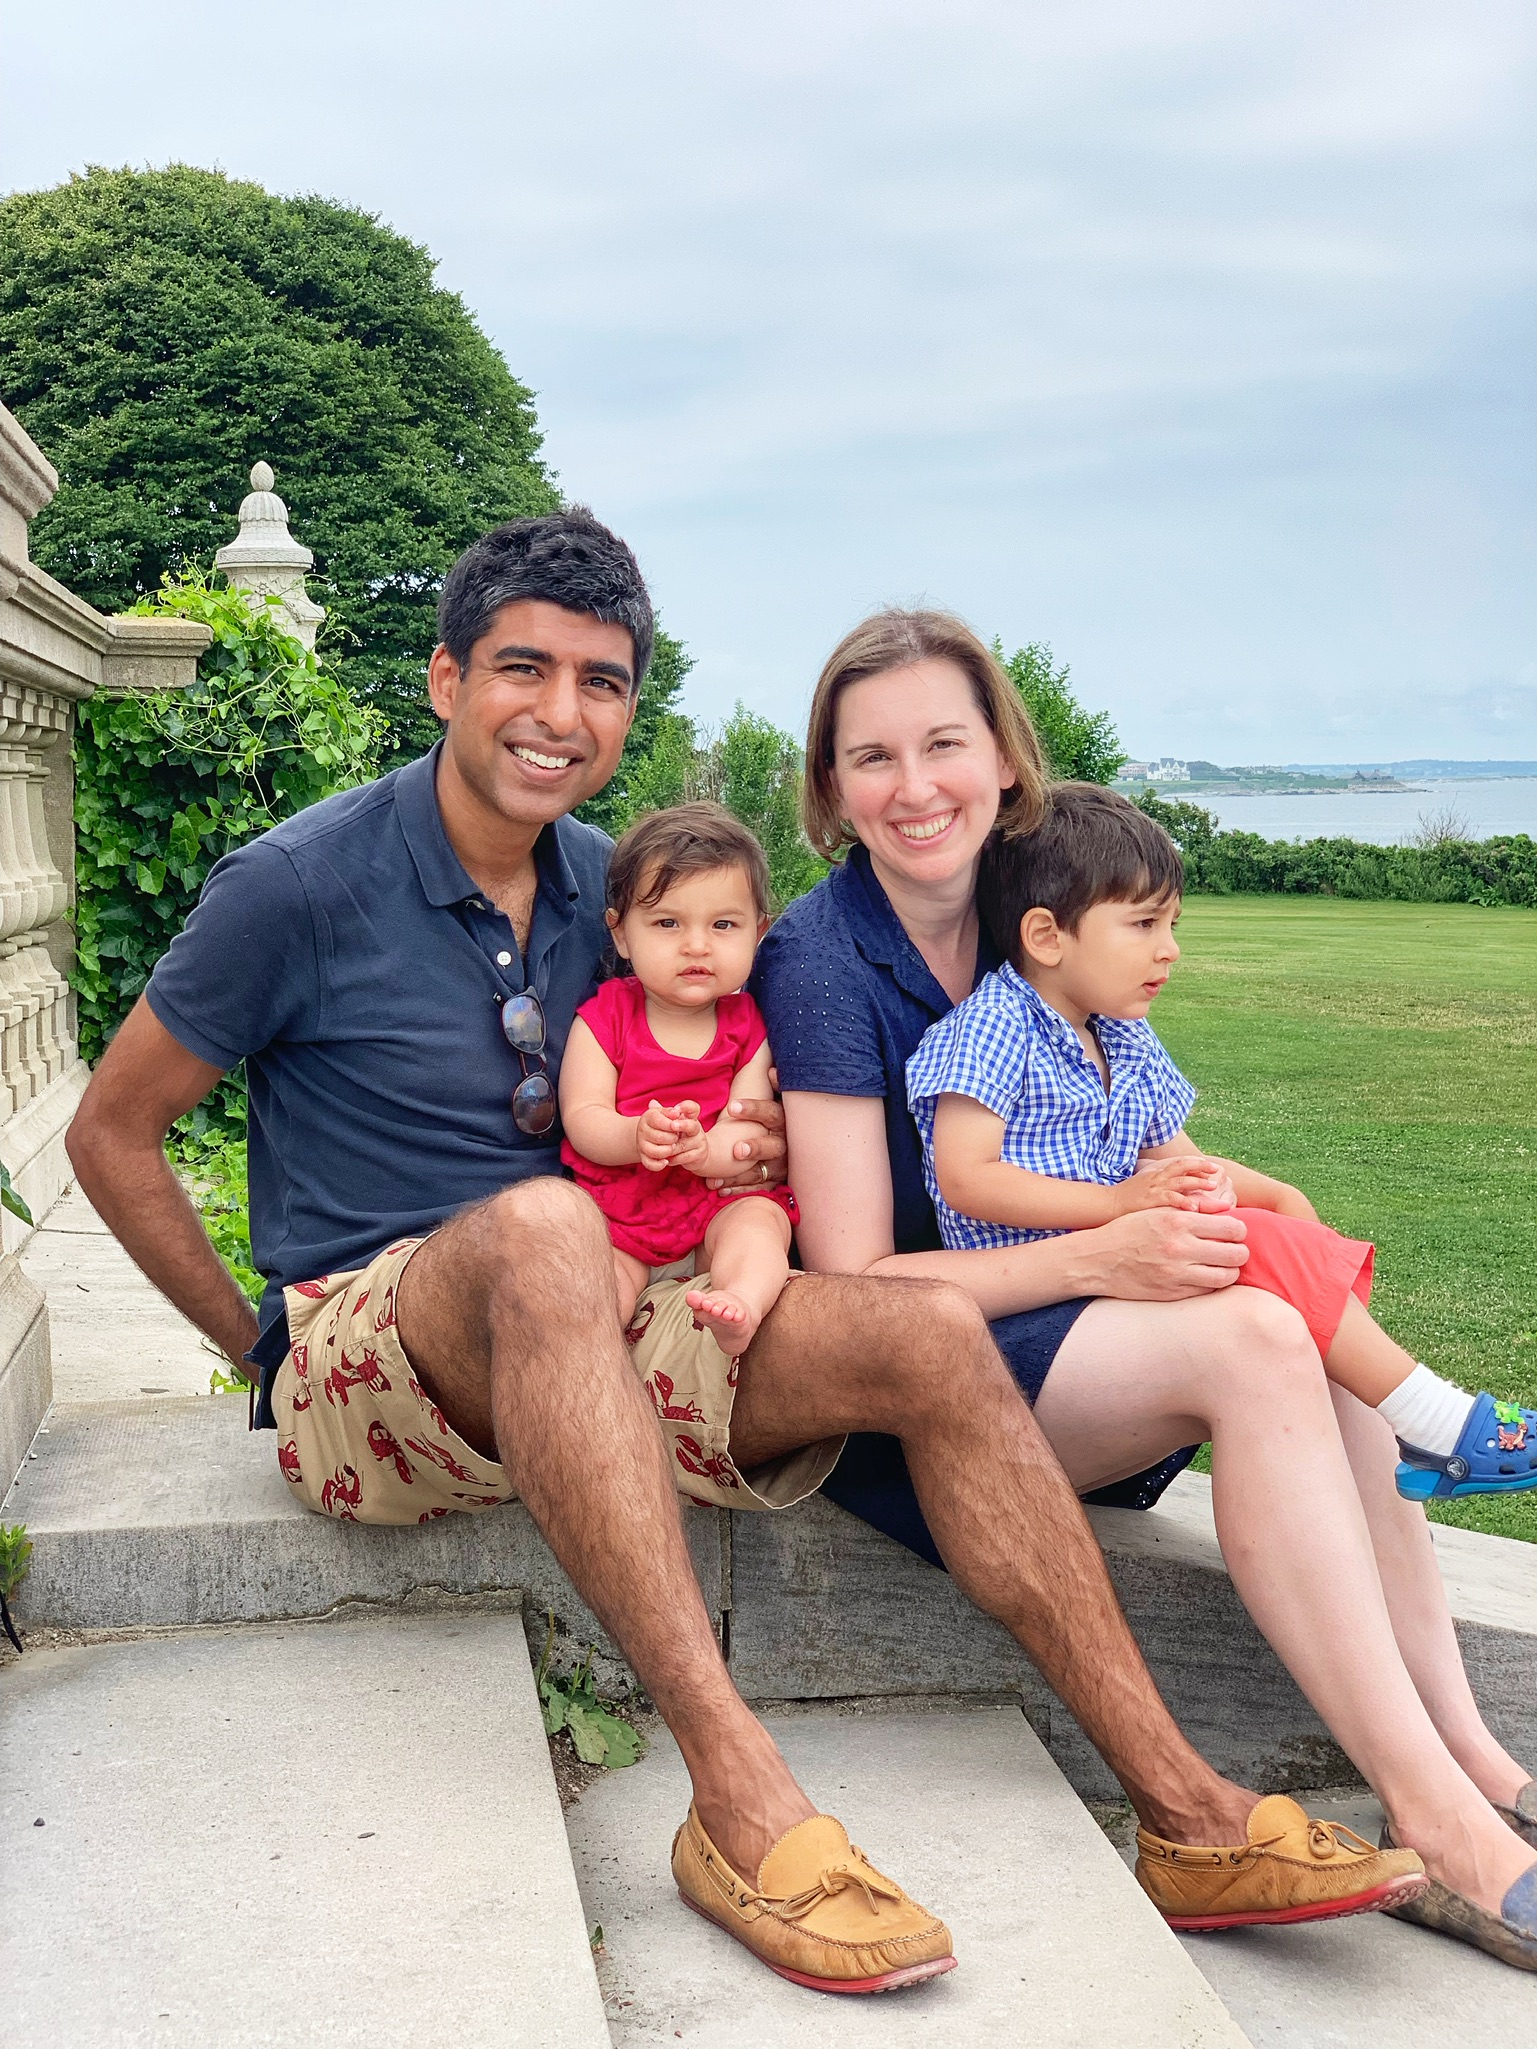 Julie Shah, Neel Shah, and family